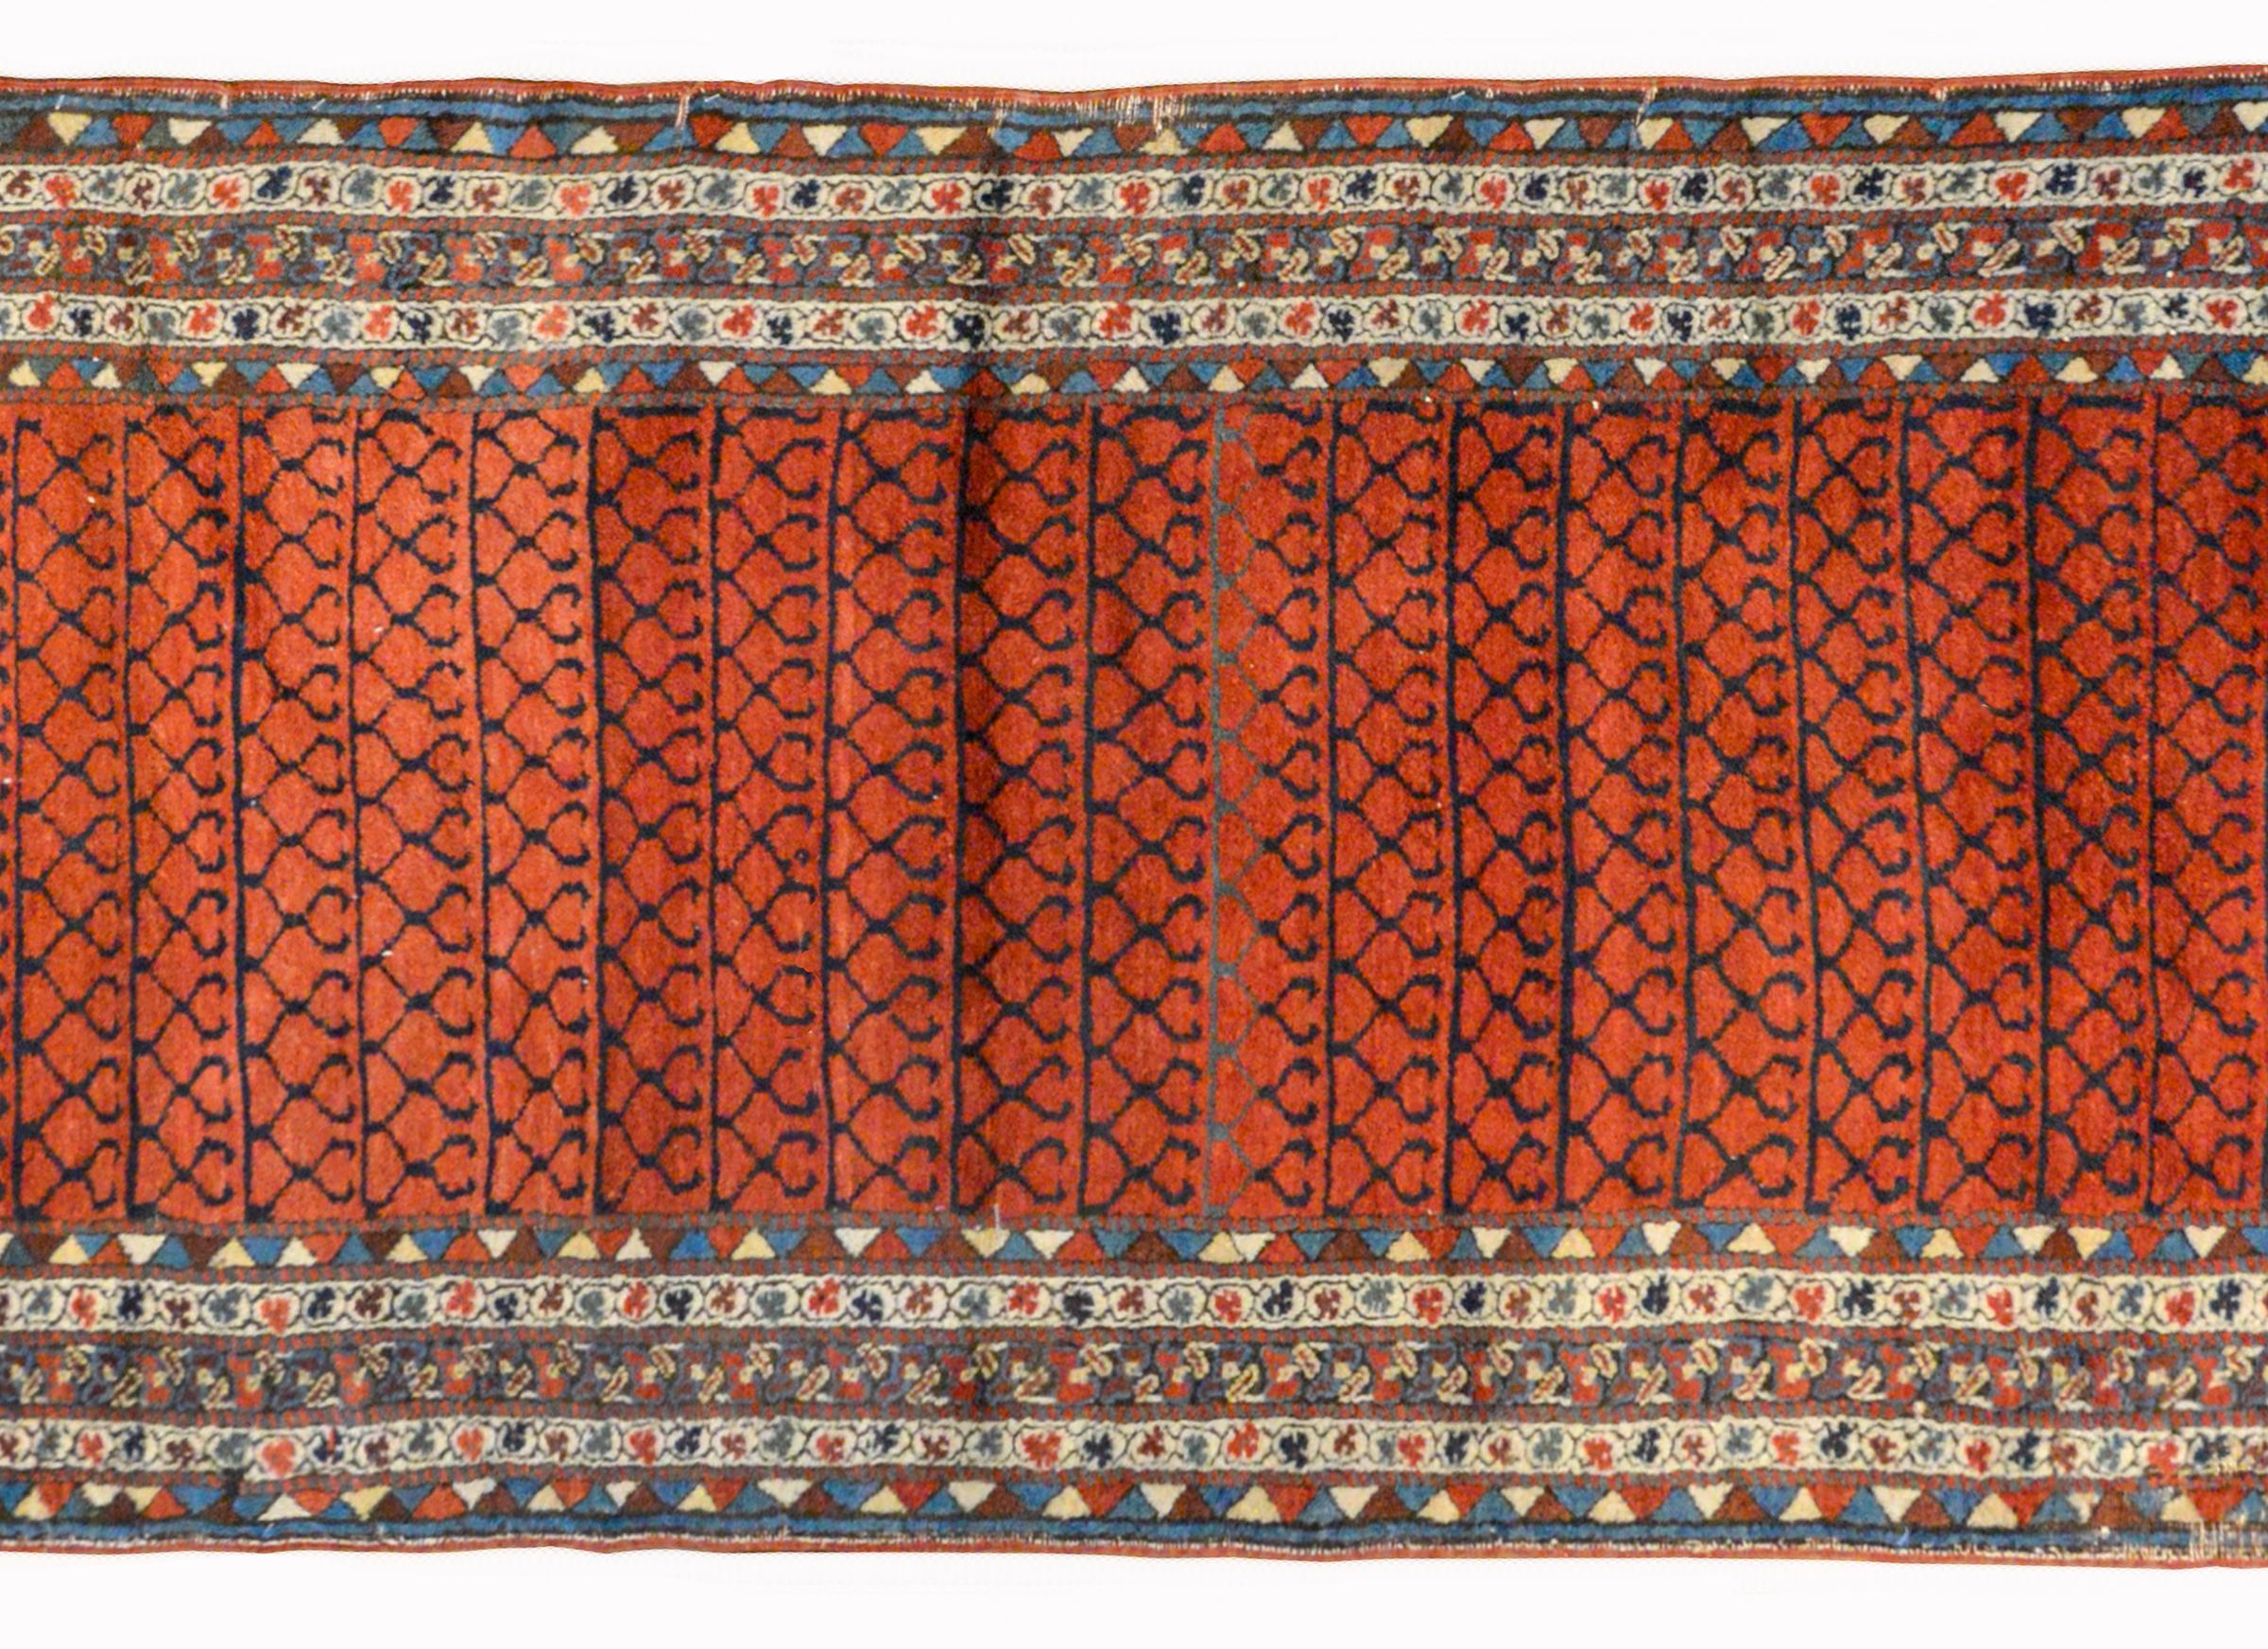 A gorgeous early 20th century Azerbaijani Karabak runner with a central field with a geometric trellis pattern woven in indigo against a rich crimson background. The border is extraordinary woven with multiple petite floral and striped patterned